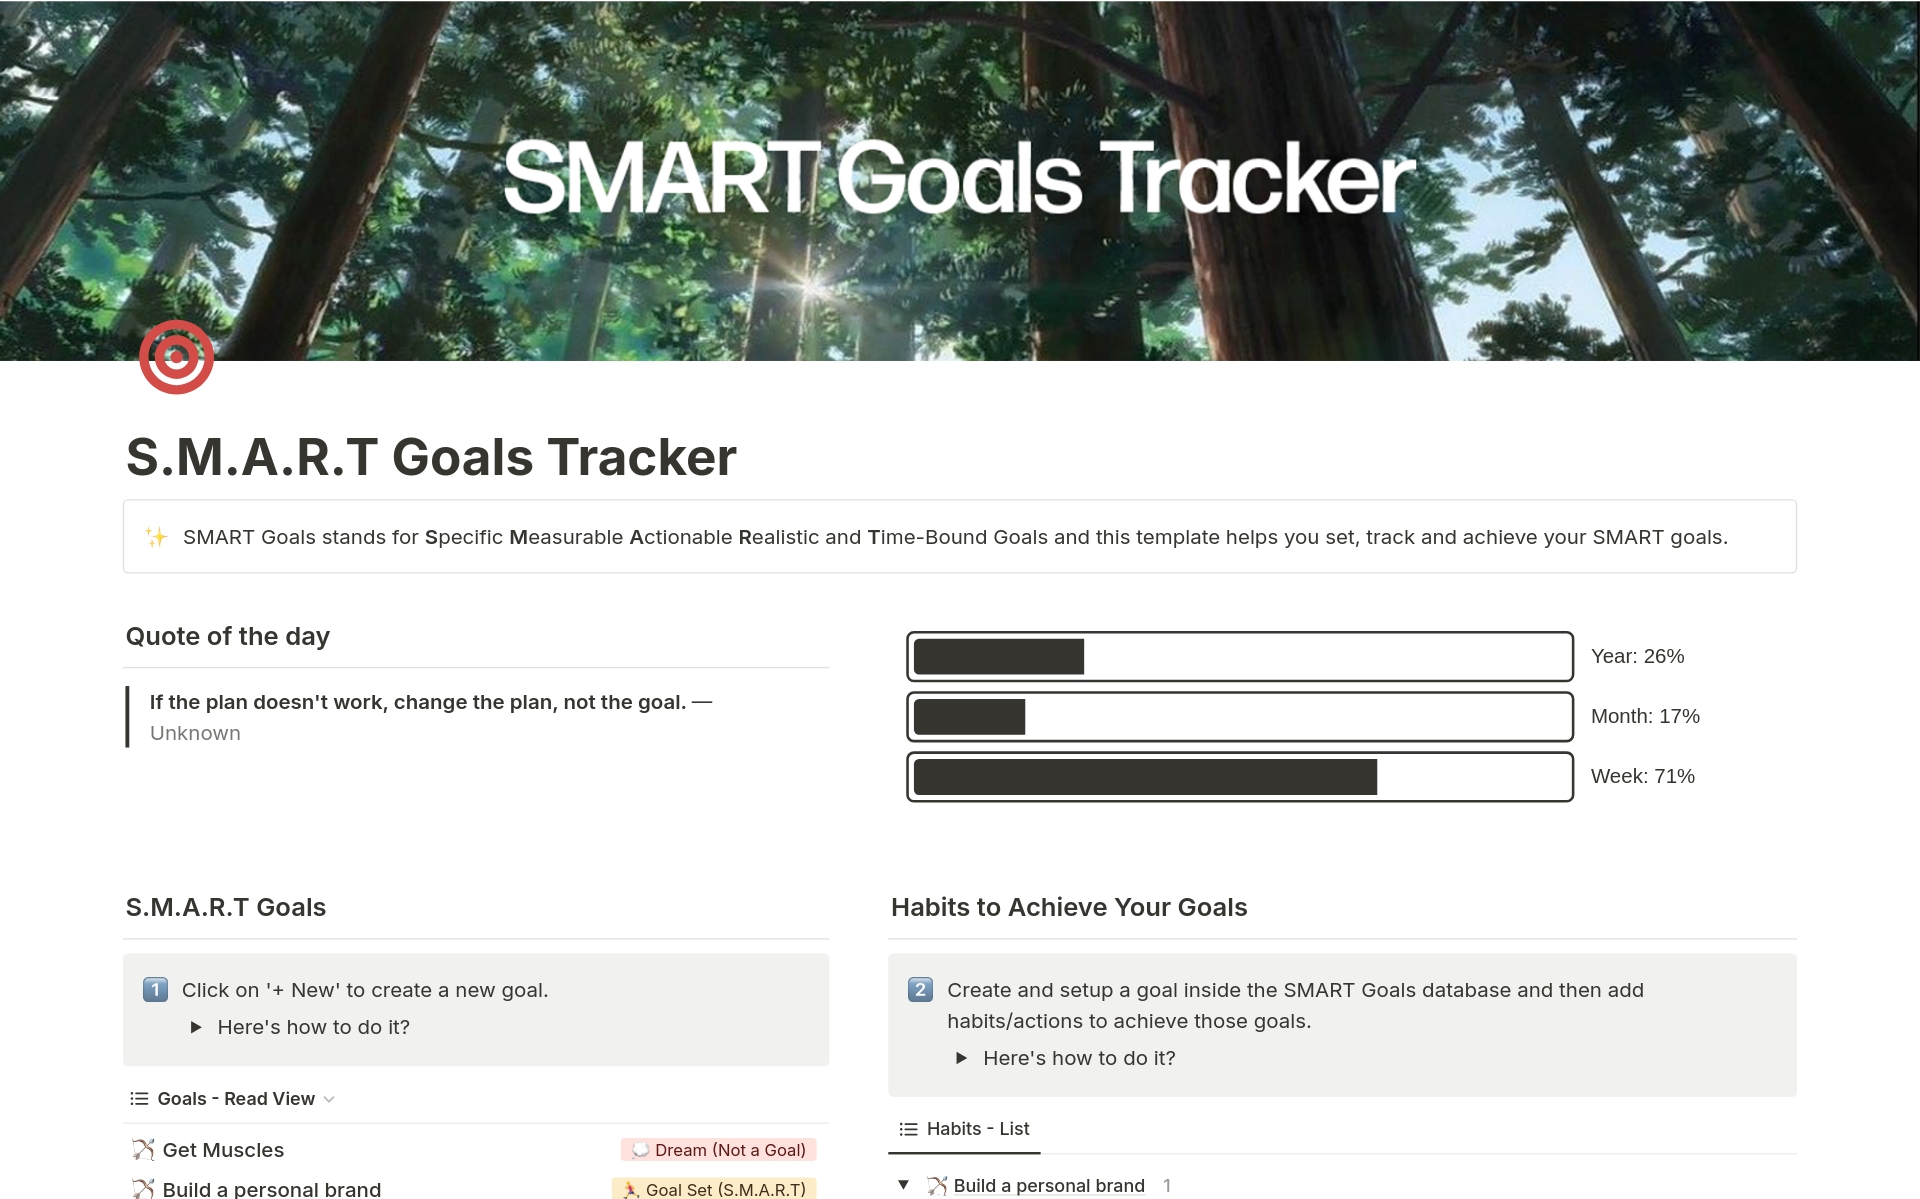 Achieve Your Goals Smartly by setting Specific Measurable Actionable Realistic and Time-Bound Goals